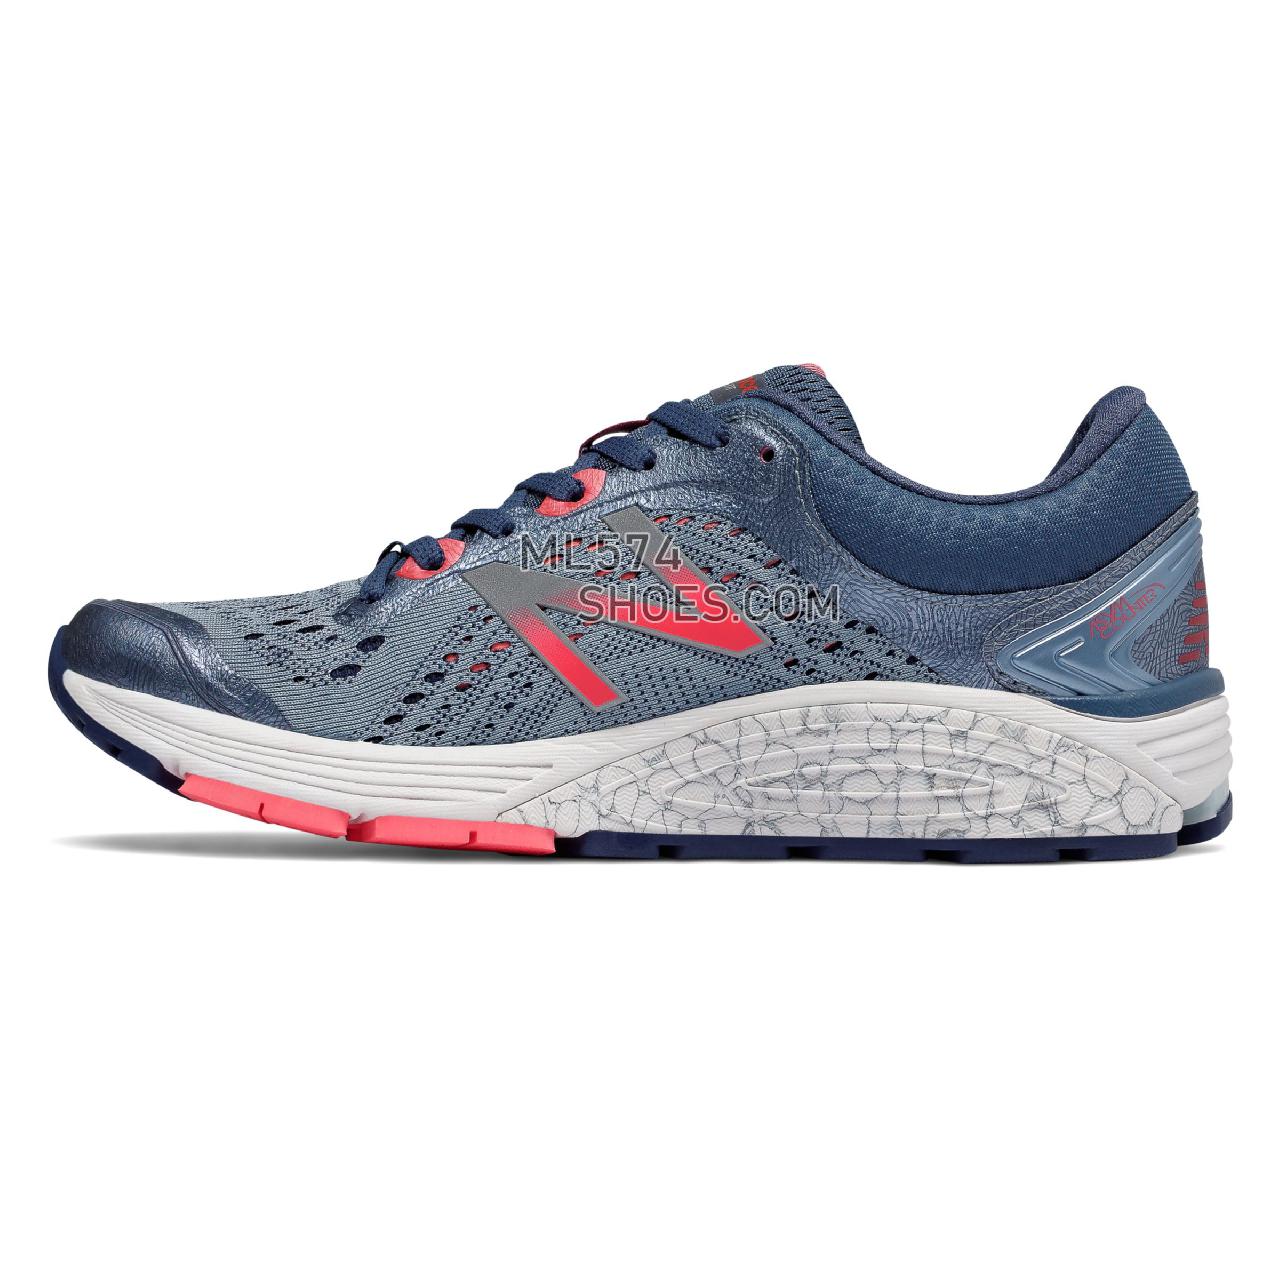 New Balance 1260v7 - Women's 1260 - Running Reflection with Vintage Indigo and Vivid Coral - W1260VC7